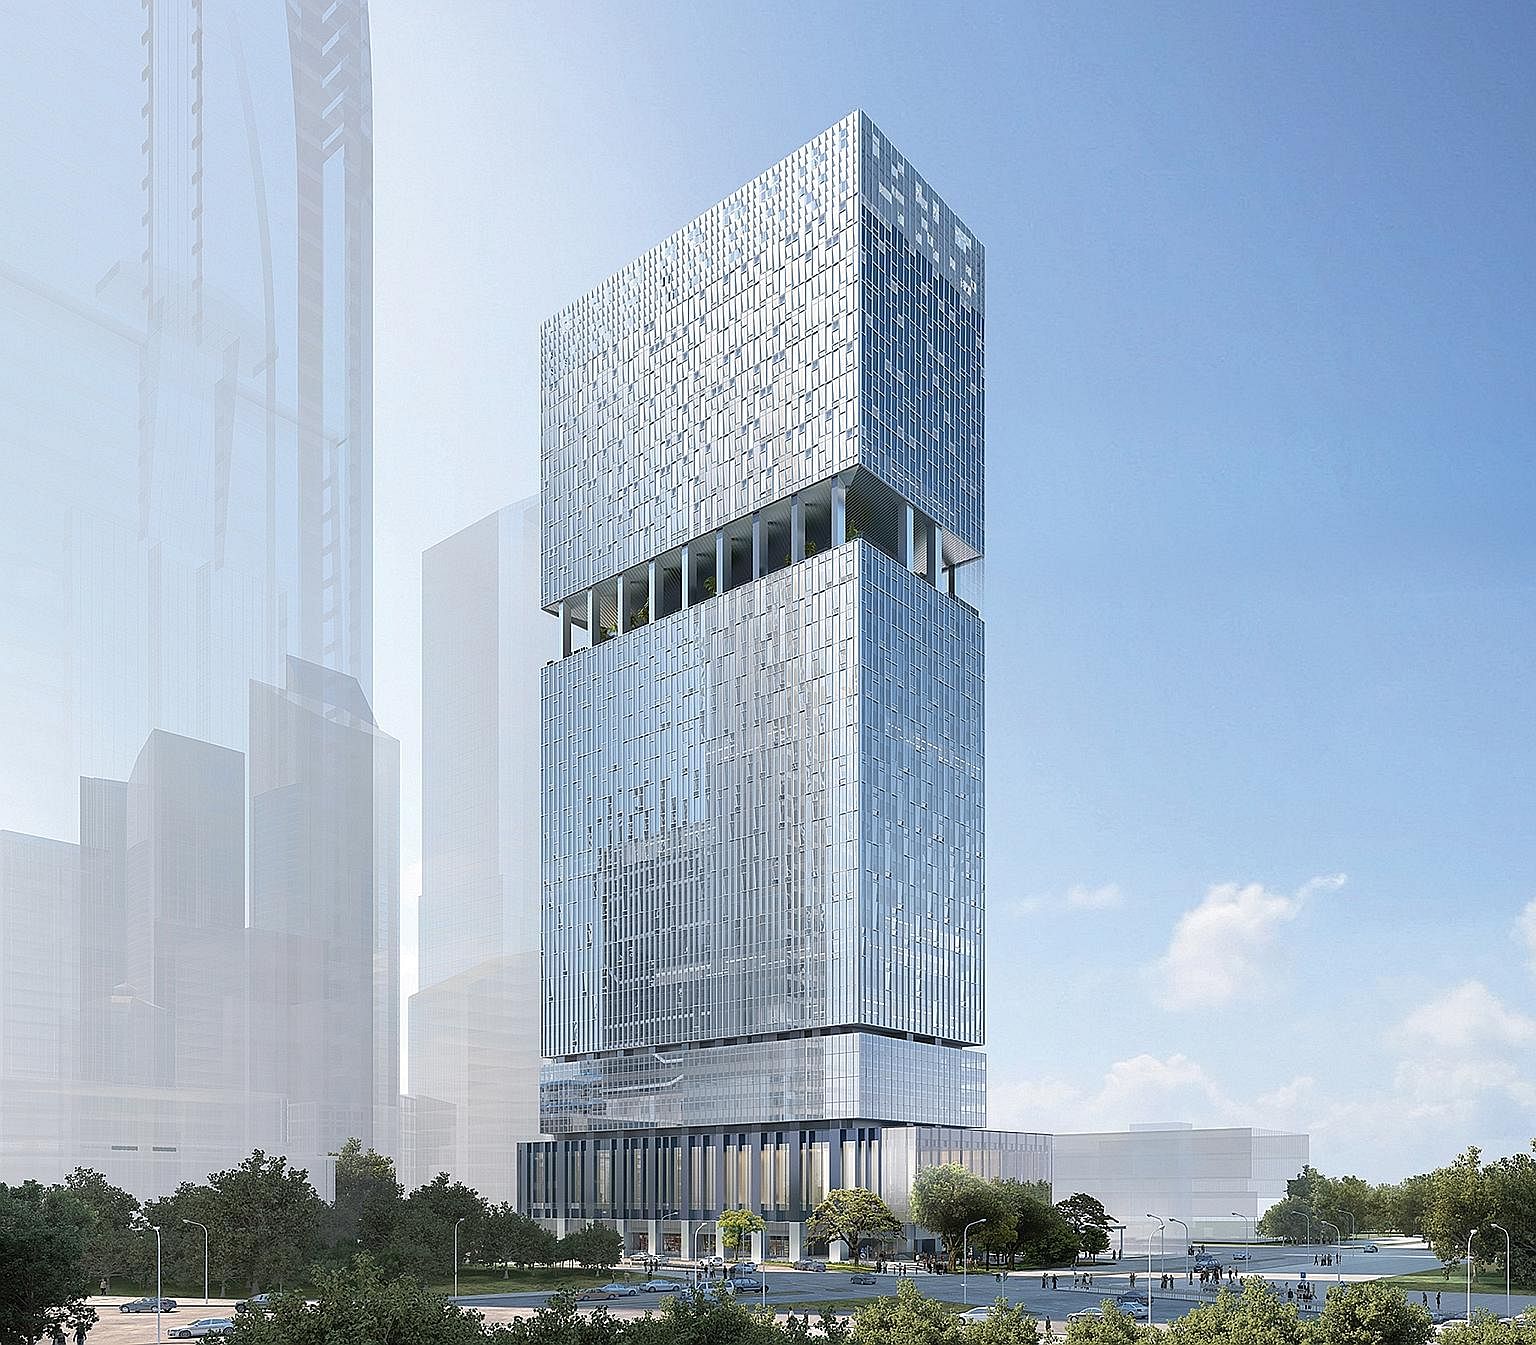 Mitsui is jointly redeveloping the former CPF Building at 79, Robinson Road, with Ascendas- Singbridge and real estate developer Tokyo Tatemono. The groundbreaking ceremony for the $1 billion project was held yesterday.